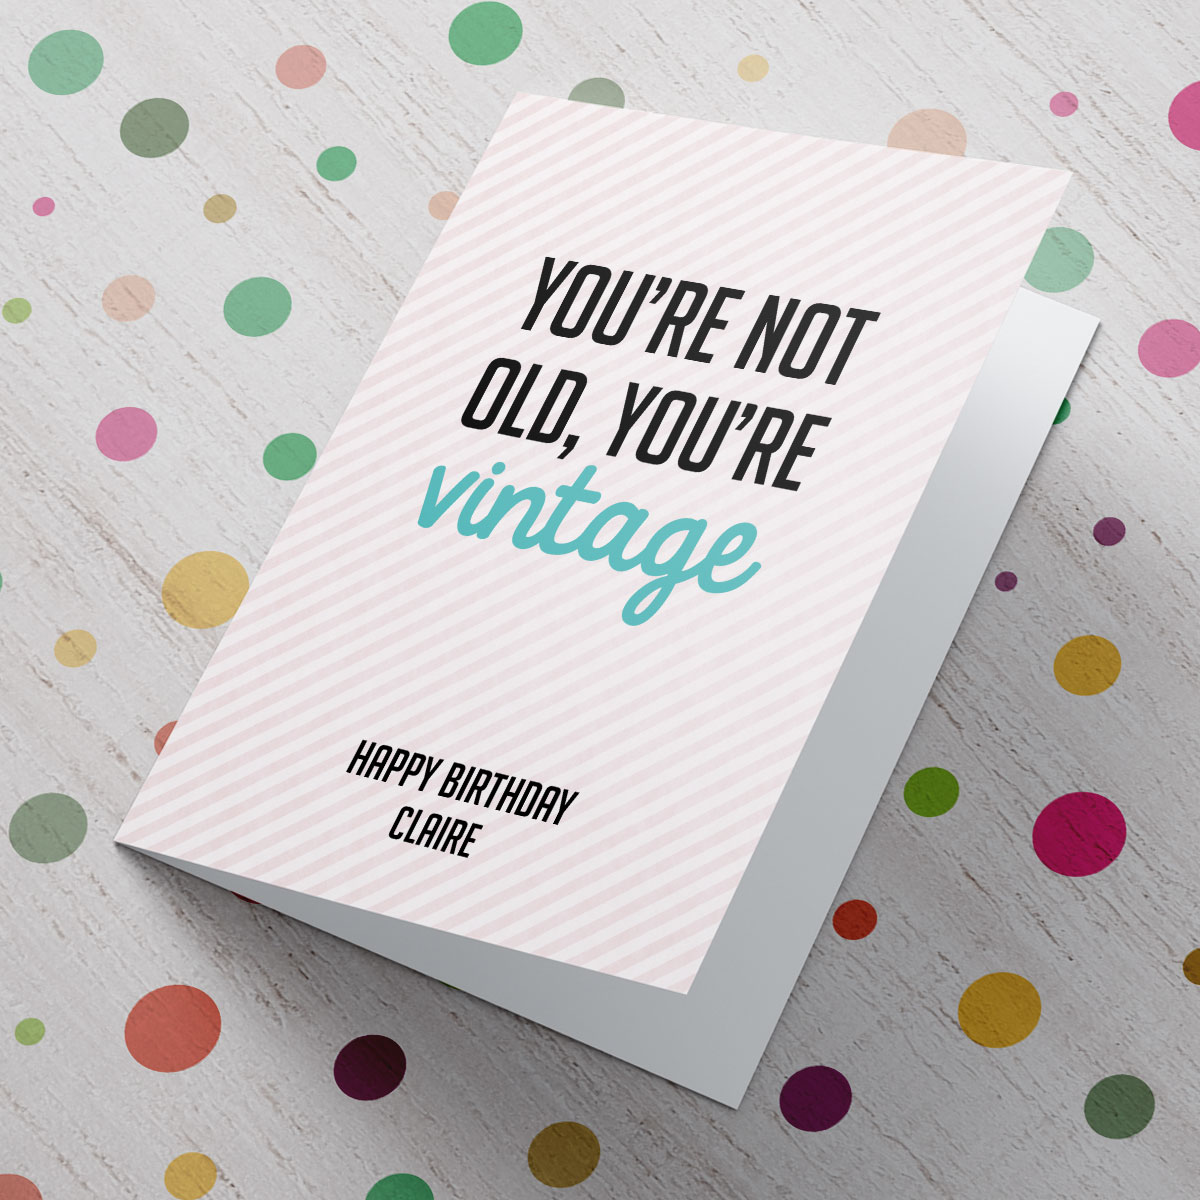 Personalised Card - You're not old